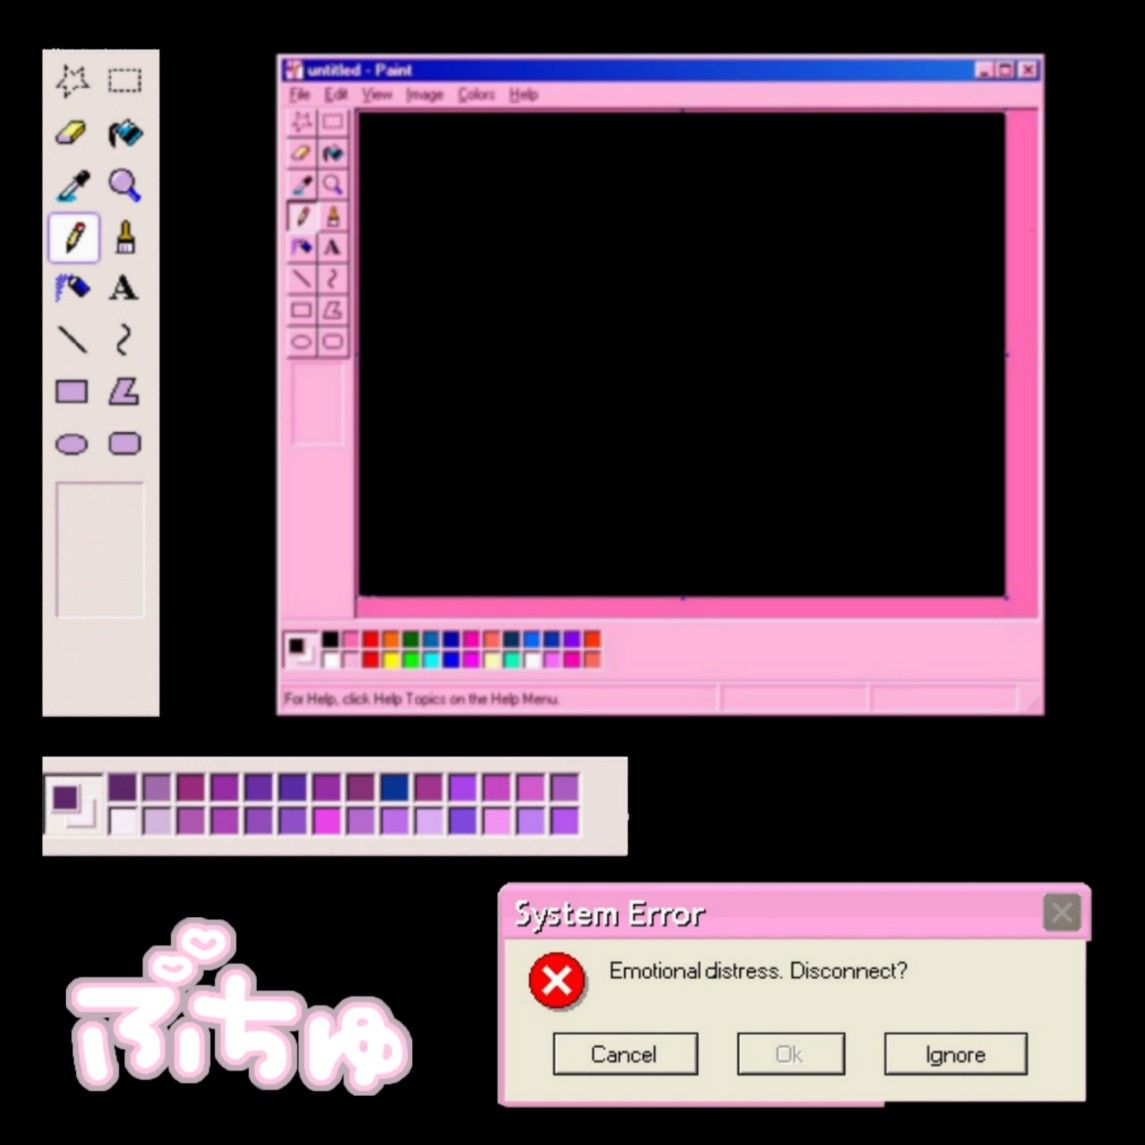 A computer screen with pink and purple colors - Webcore